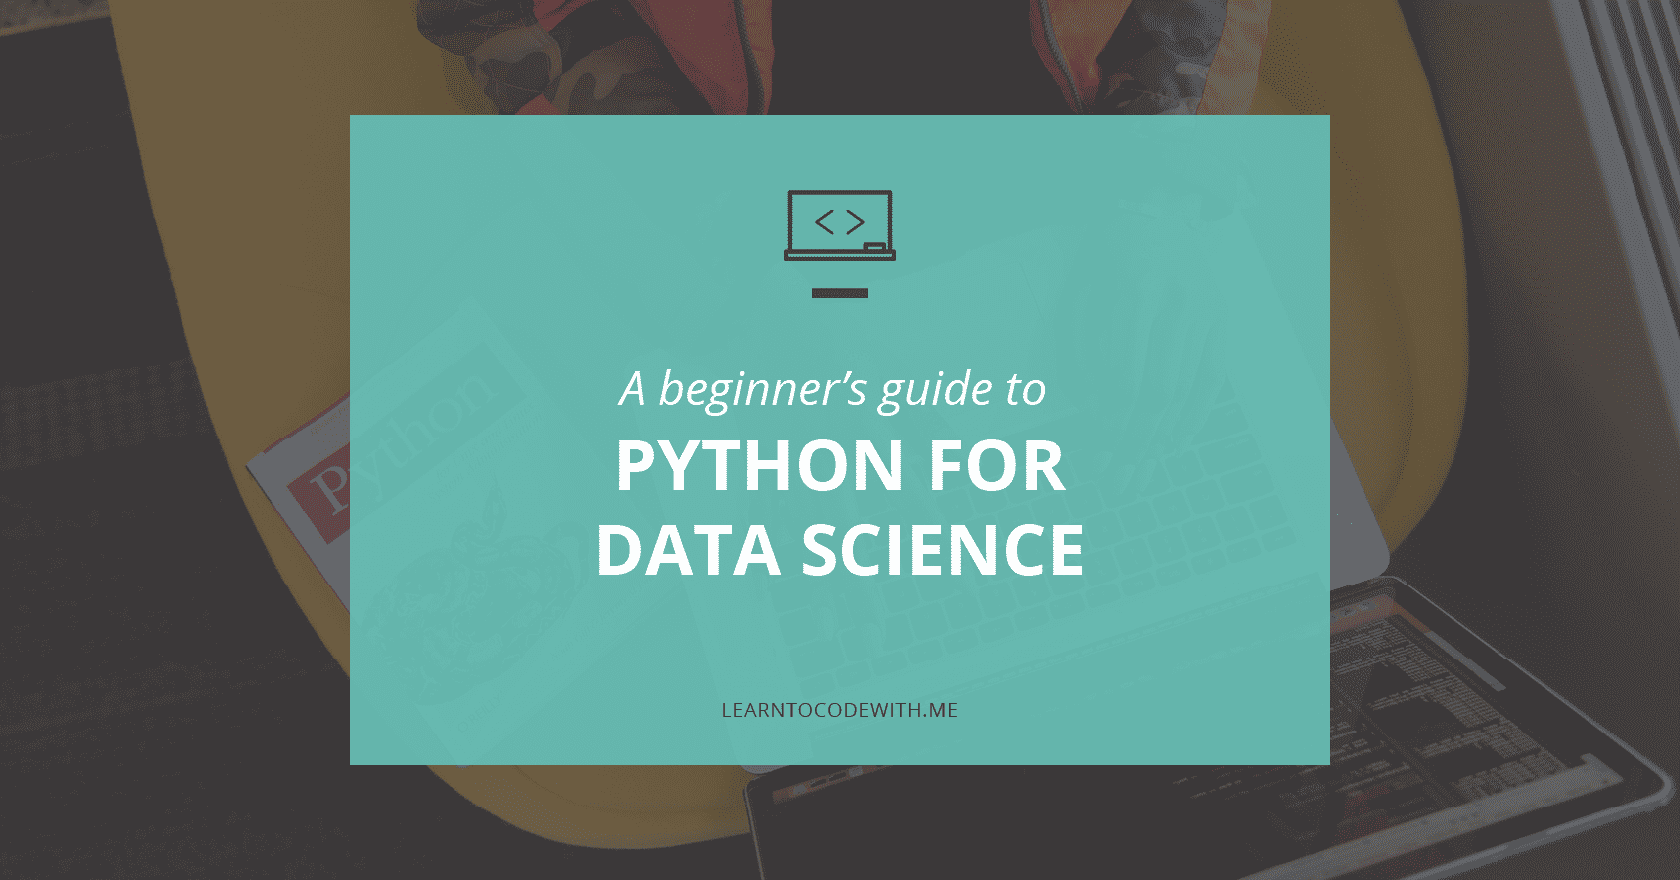 Python for Data Science